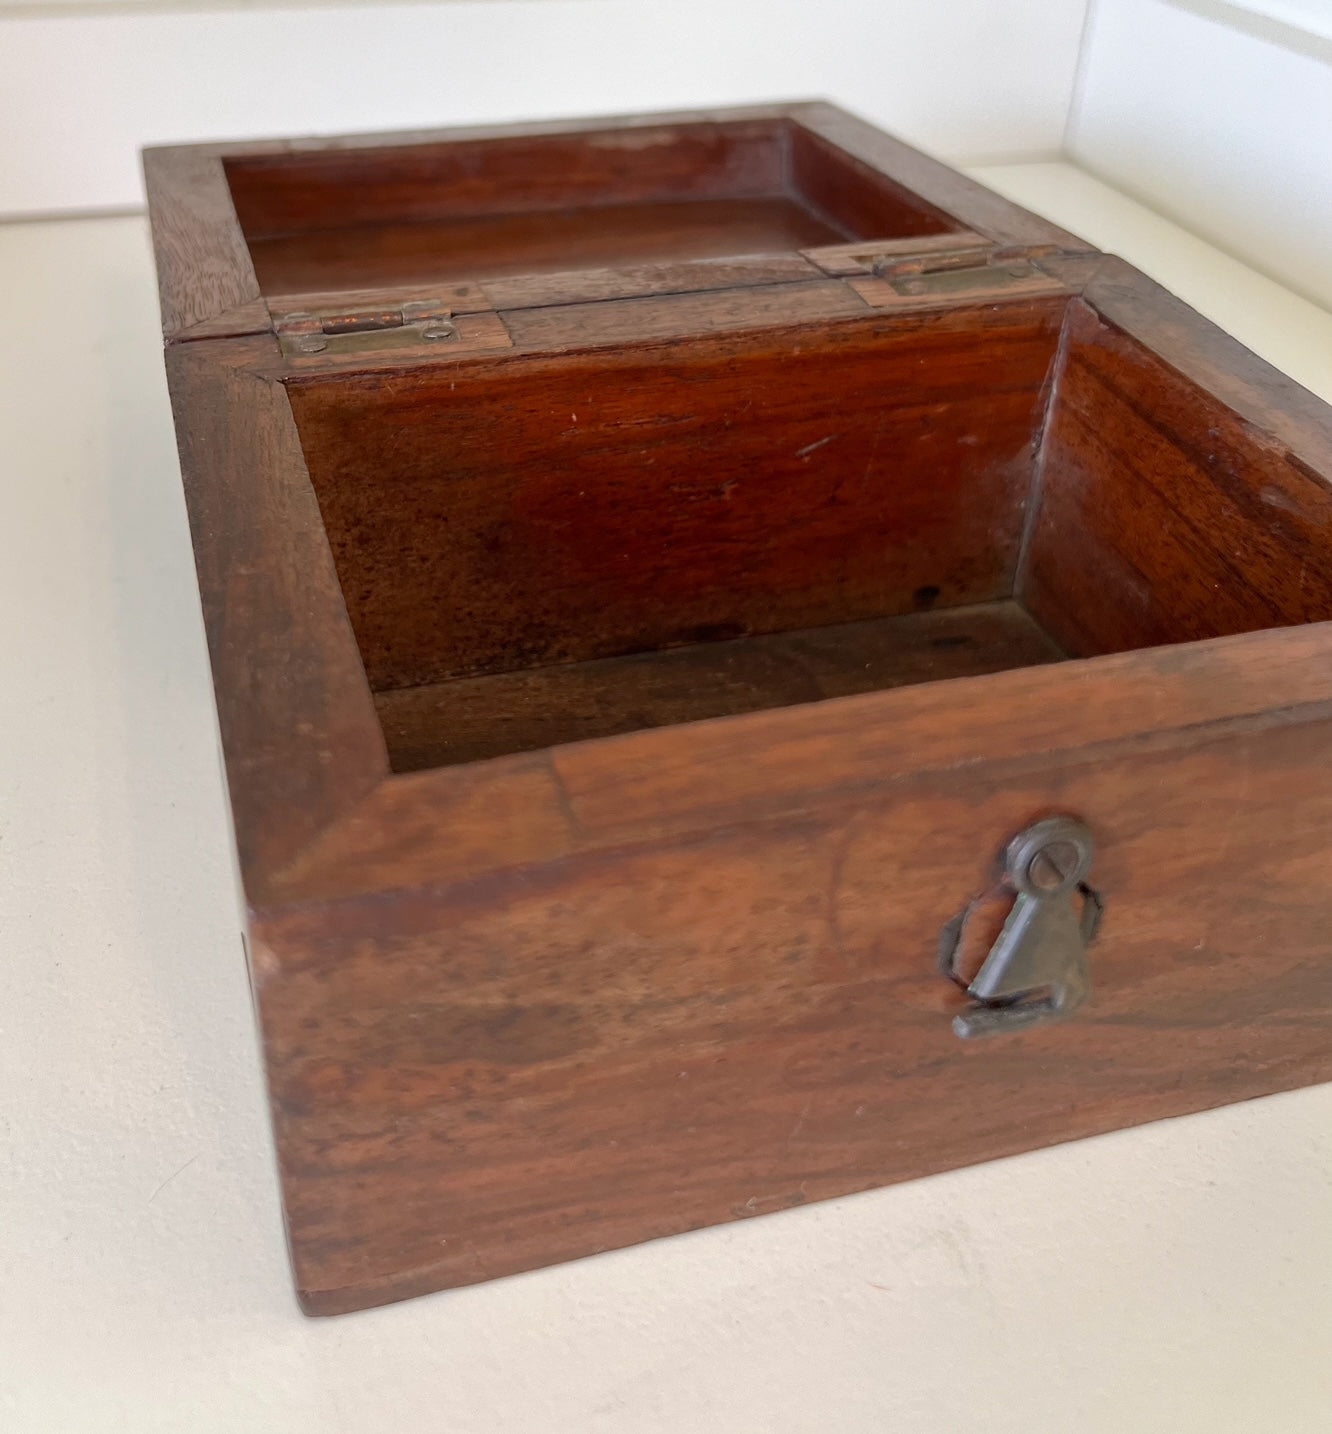 Old wooden anchor box